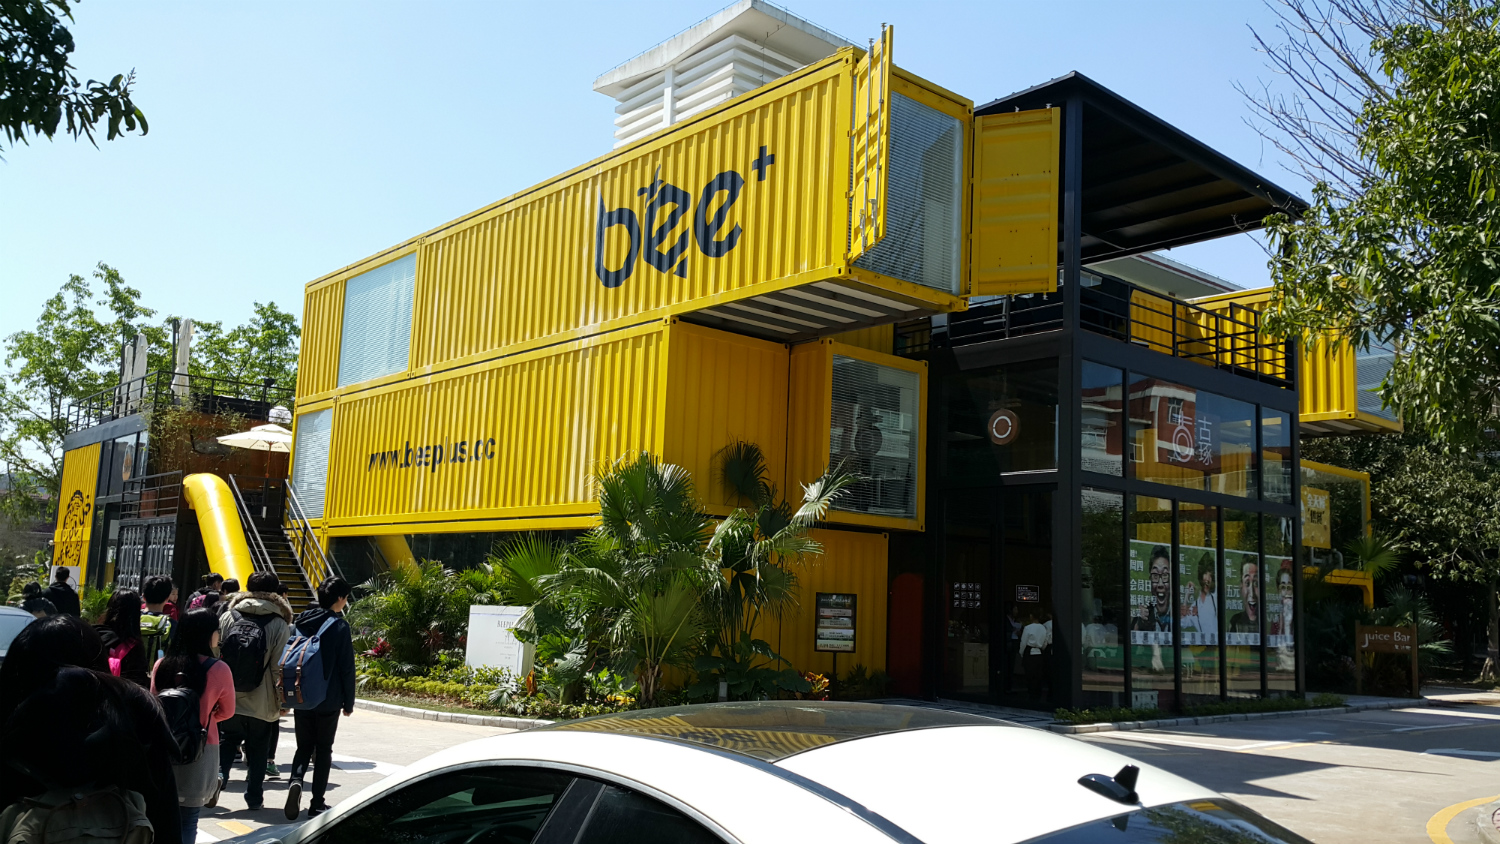 Bee+, a very creative idea of using containers as office to gather a group of young entrepreneurs operating their businesses here. 